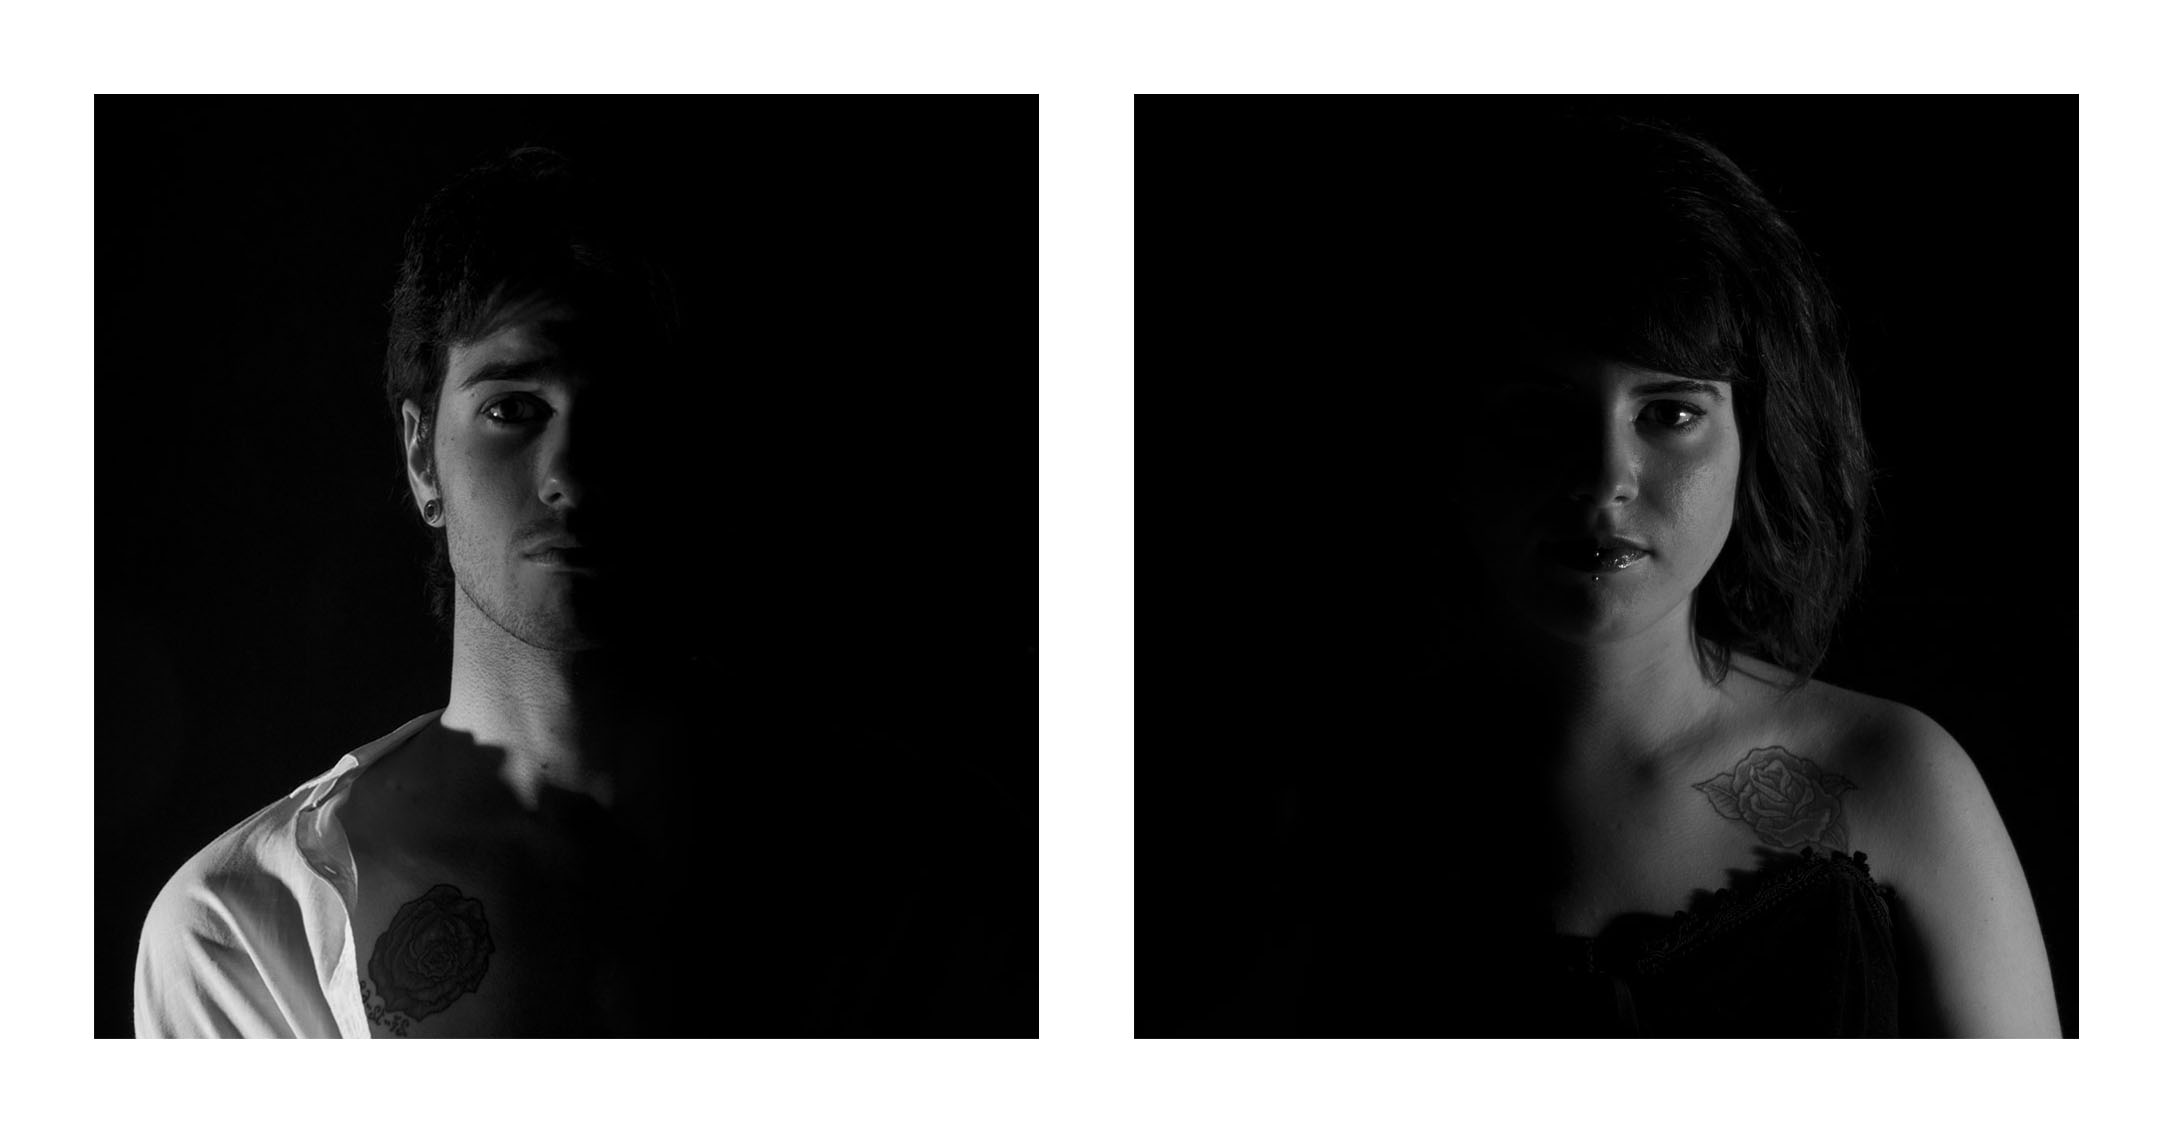 two images of the same woman staring at each other